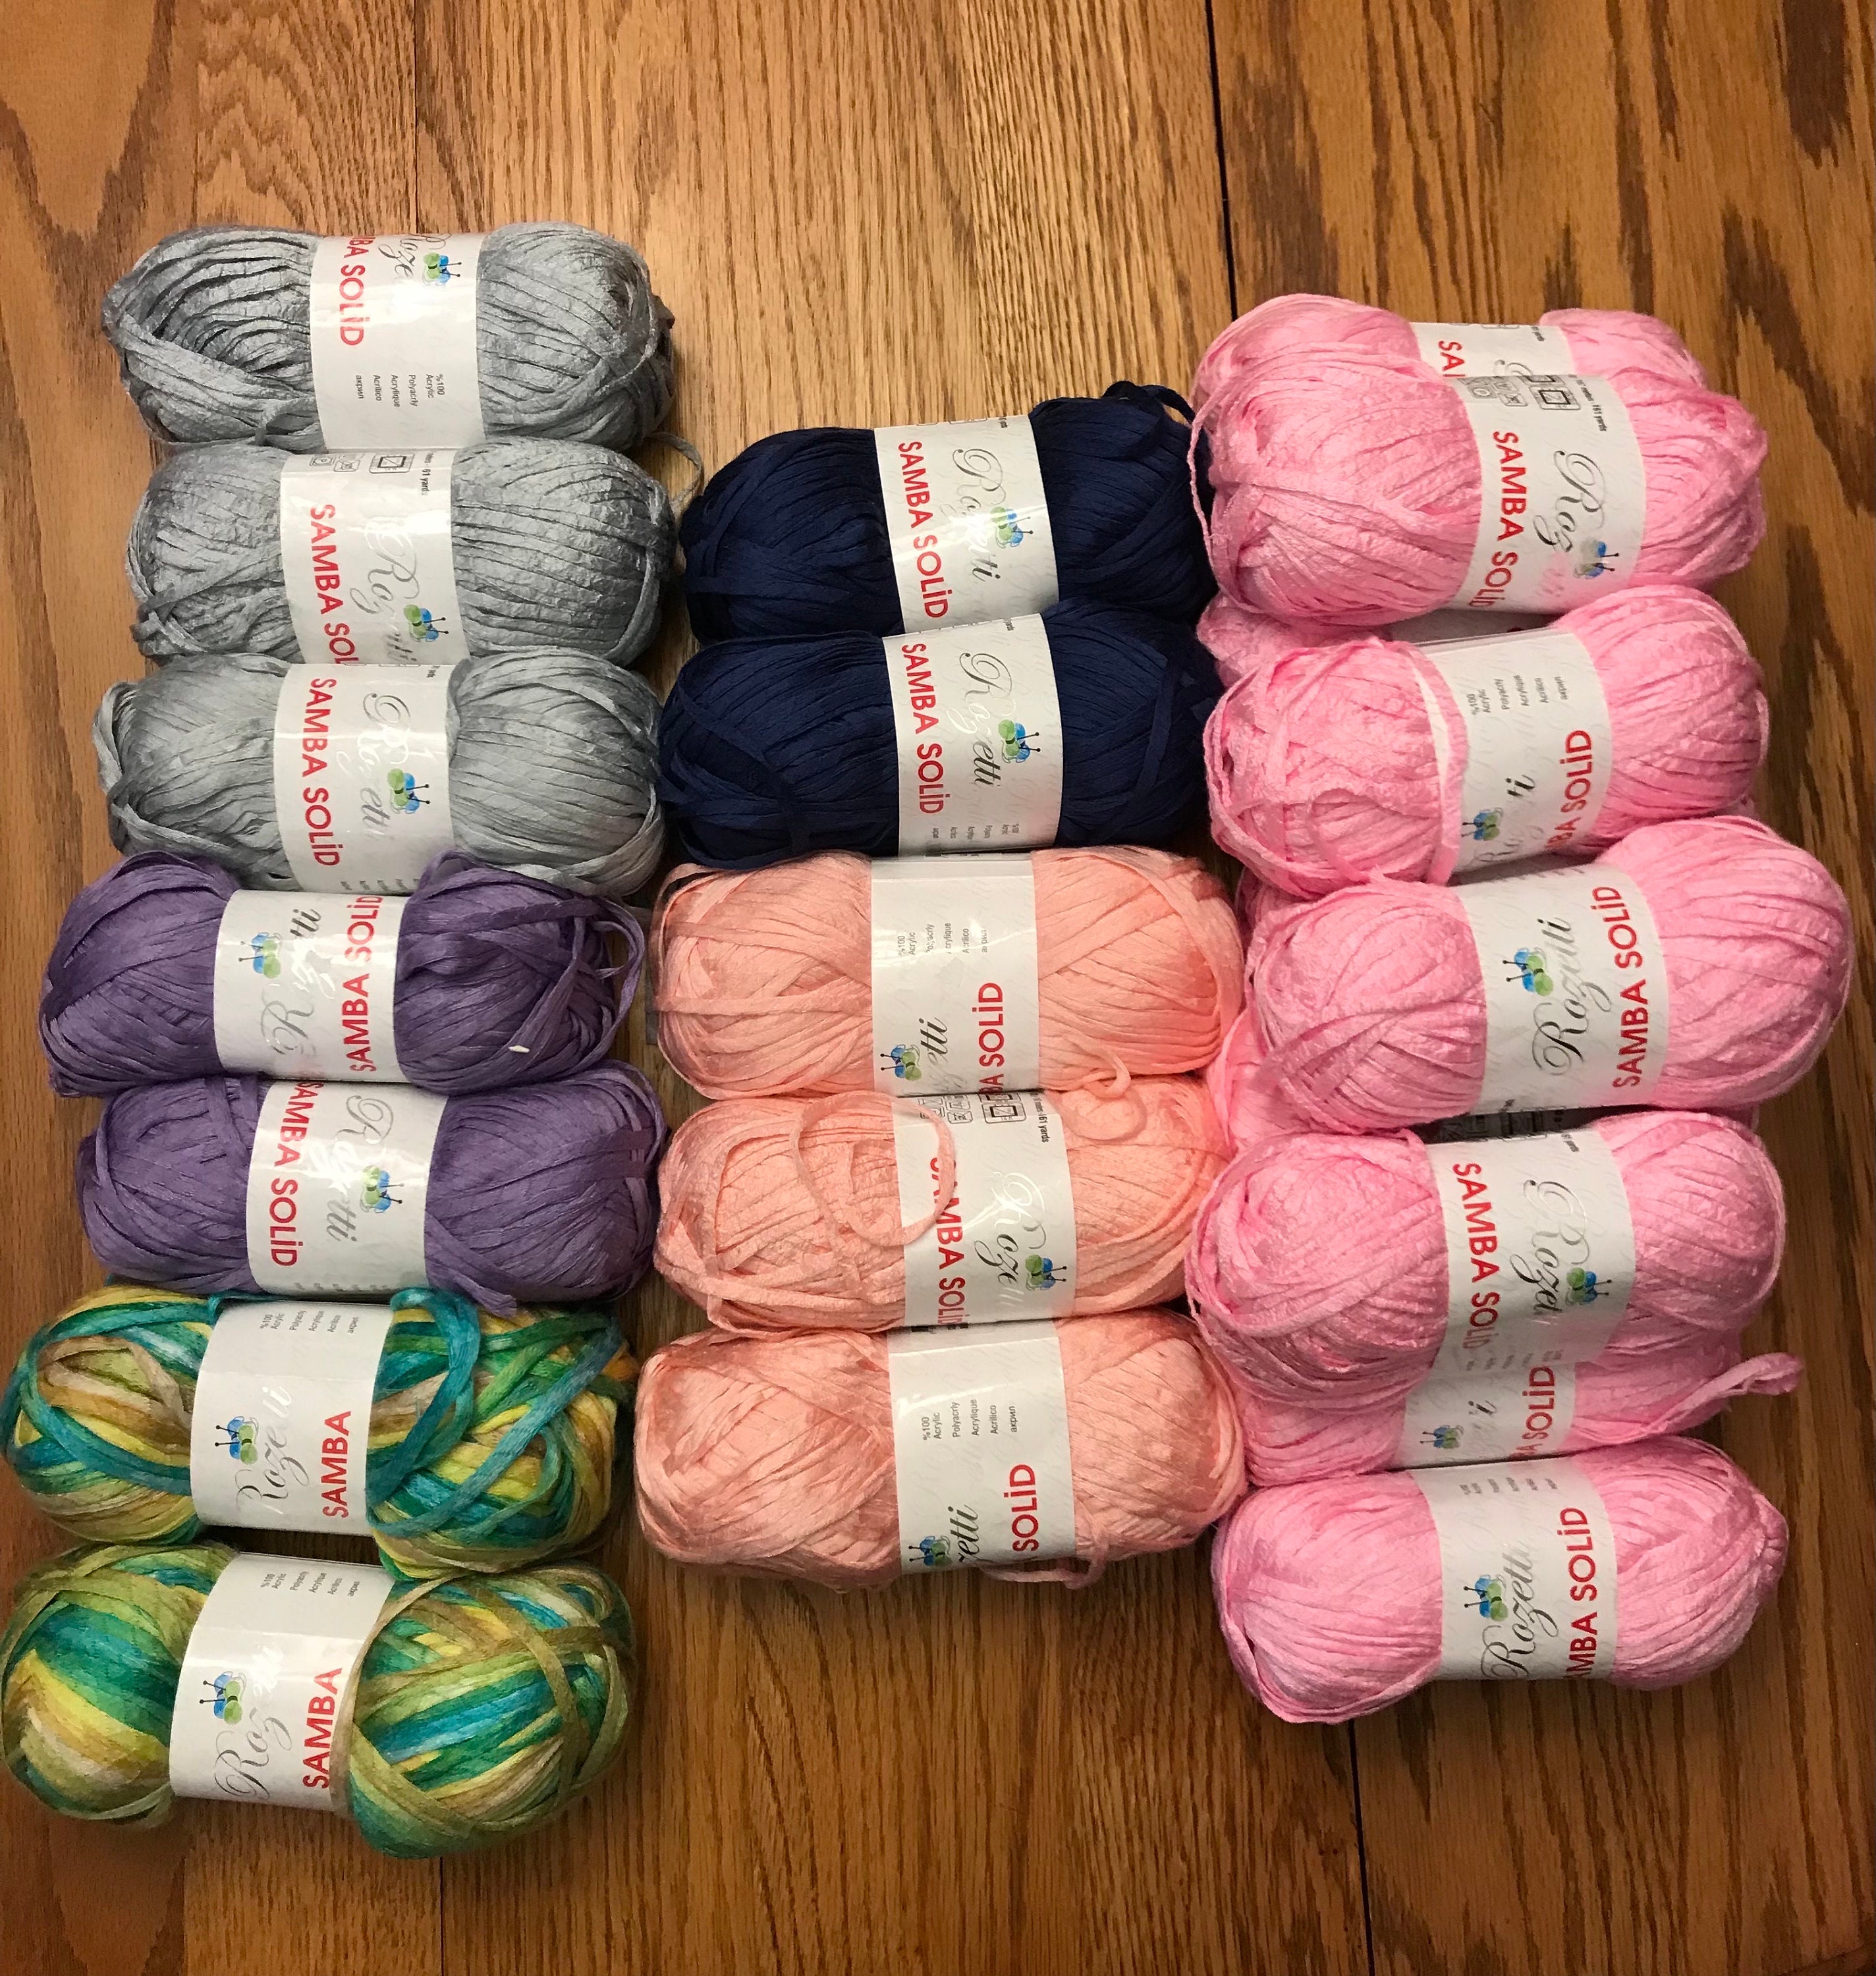 Colorful Yarn Bundle, Ferris Wheel 12 Cakes Beautiful Soft Yarn for All  Projects, Pretty Yarn for Shawls, Baby Items, Blankets, Gifts 